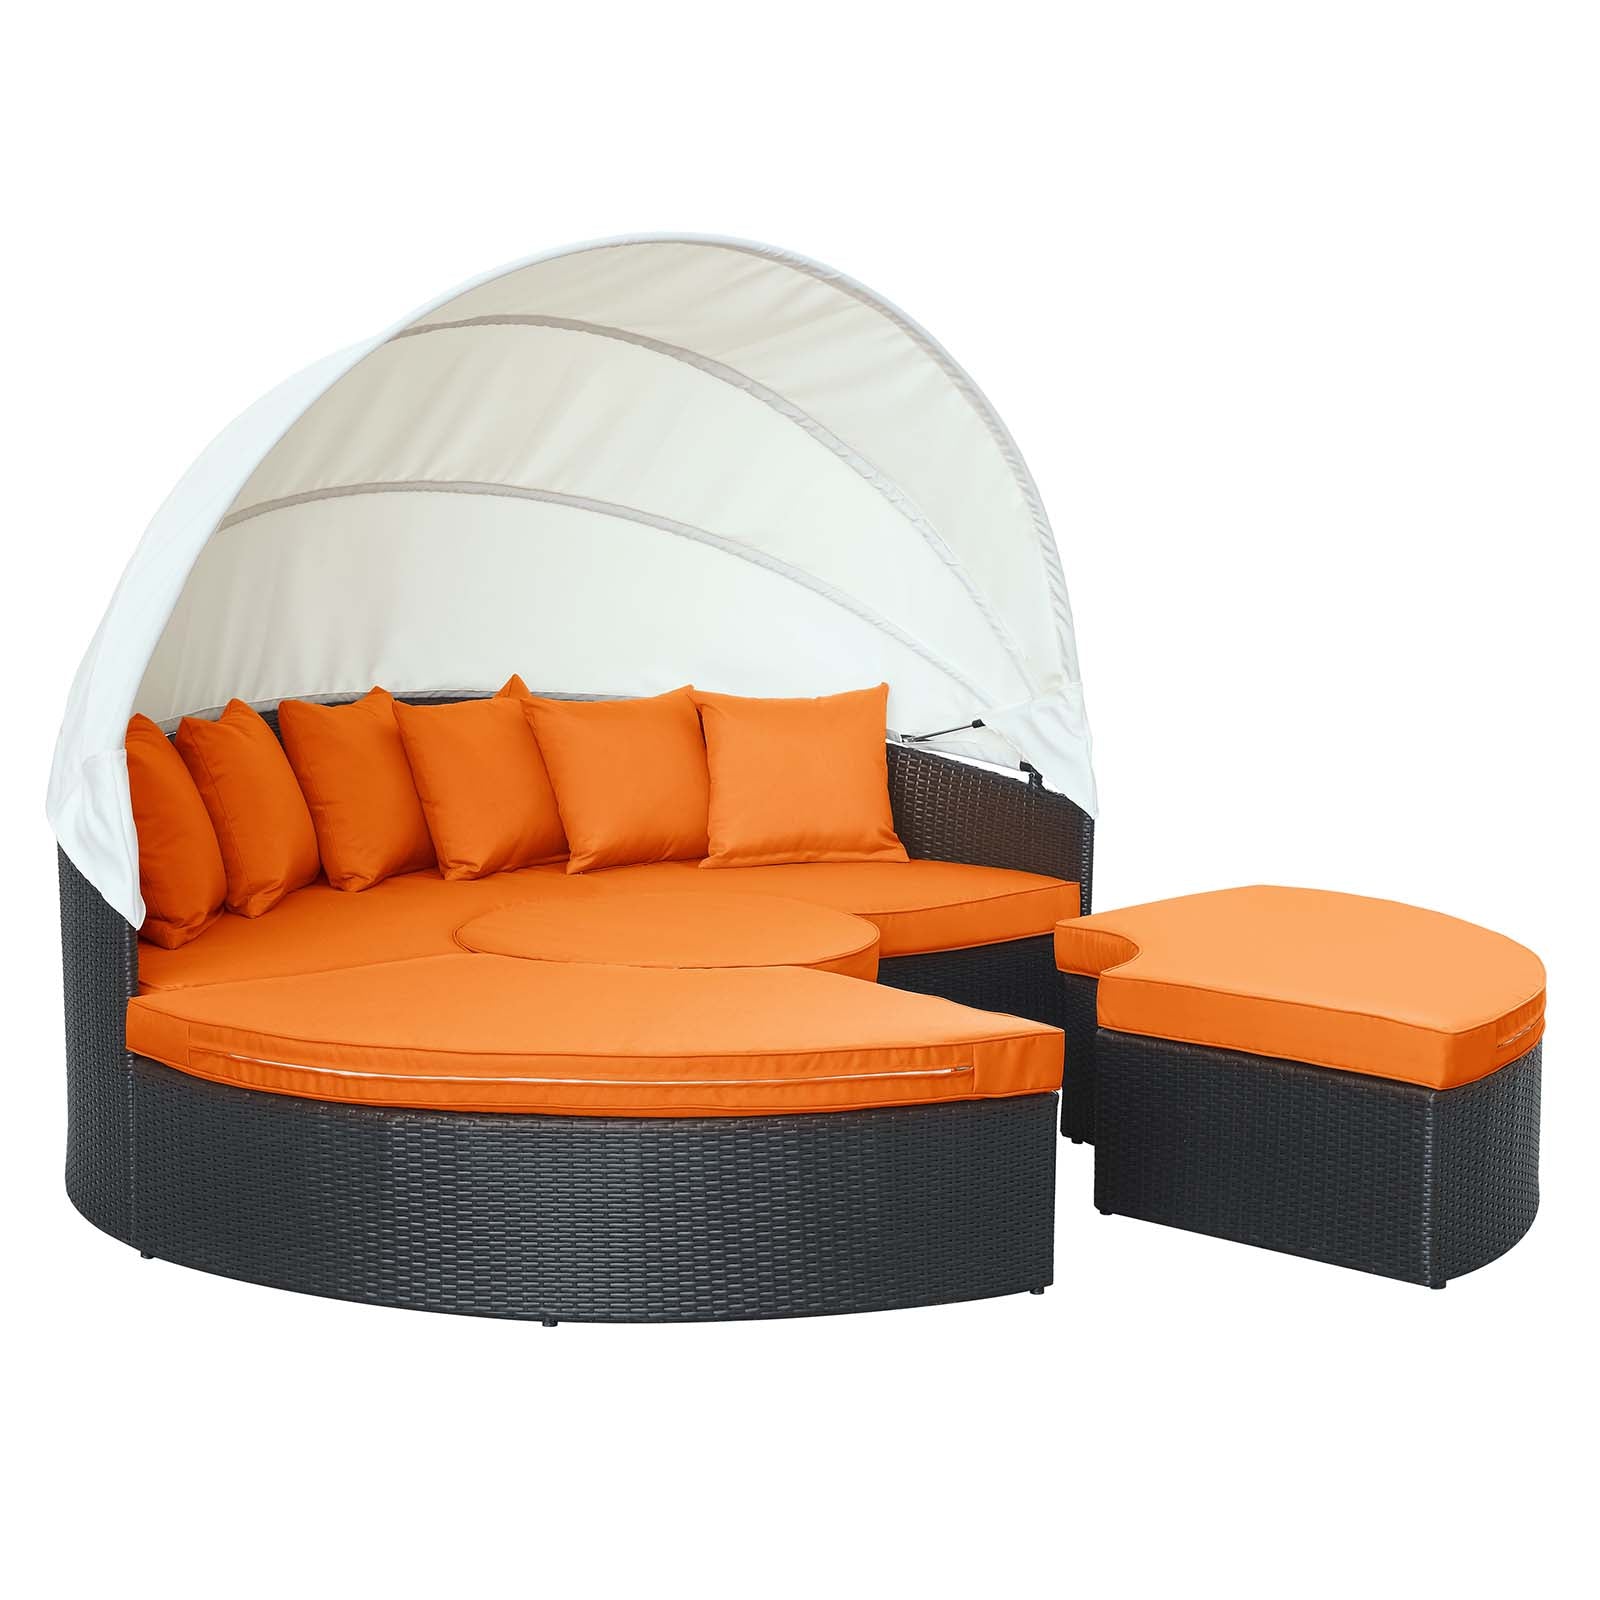 Modway Patio Daybeds - Quest Canopy Outdoor Patio Daybed Espresso Orange